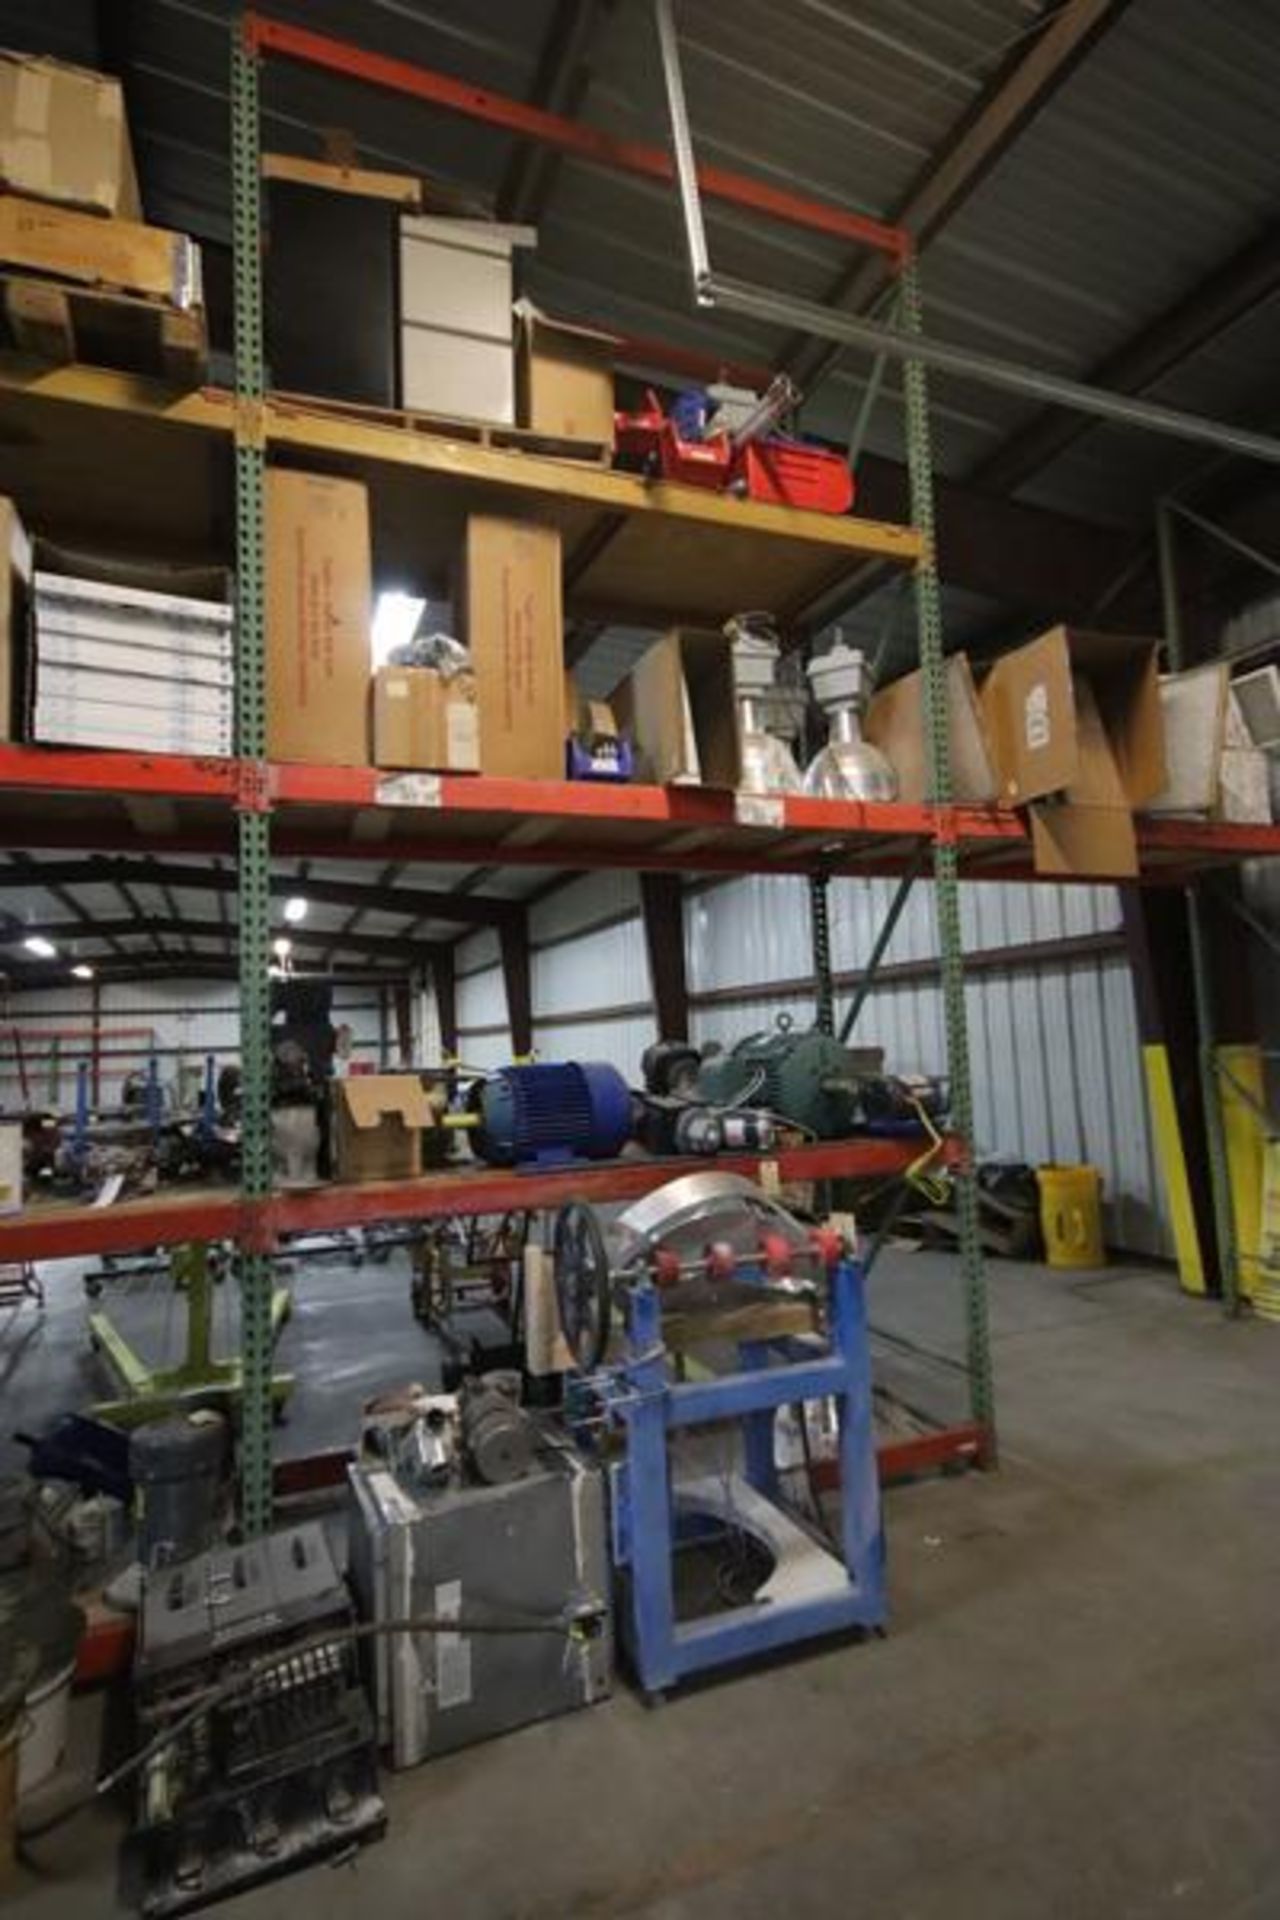 4-Sections of Pallet Racking with Contents- Motors, Switches, Compressor Parts, Lights, Filters, Val - Image 5 of 6